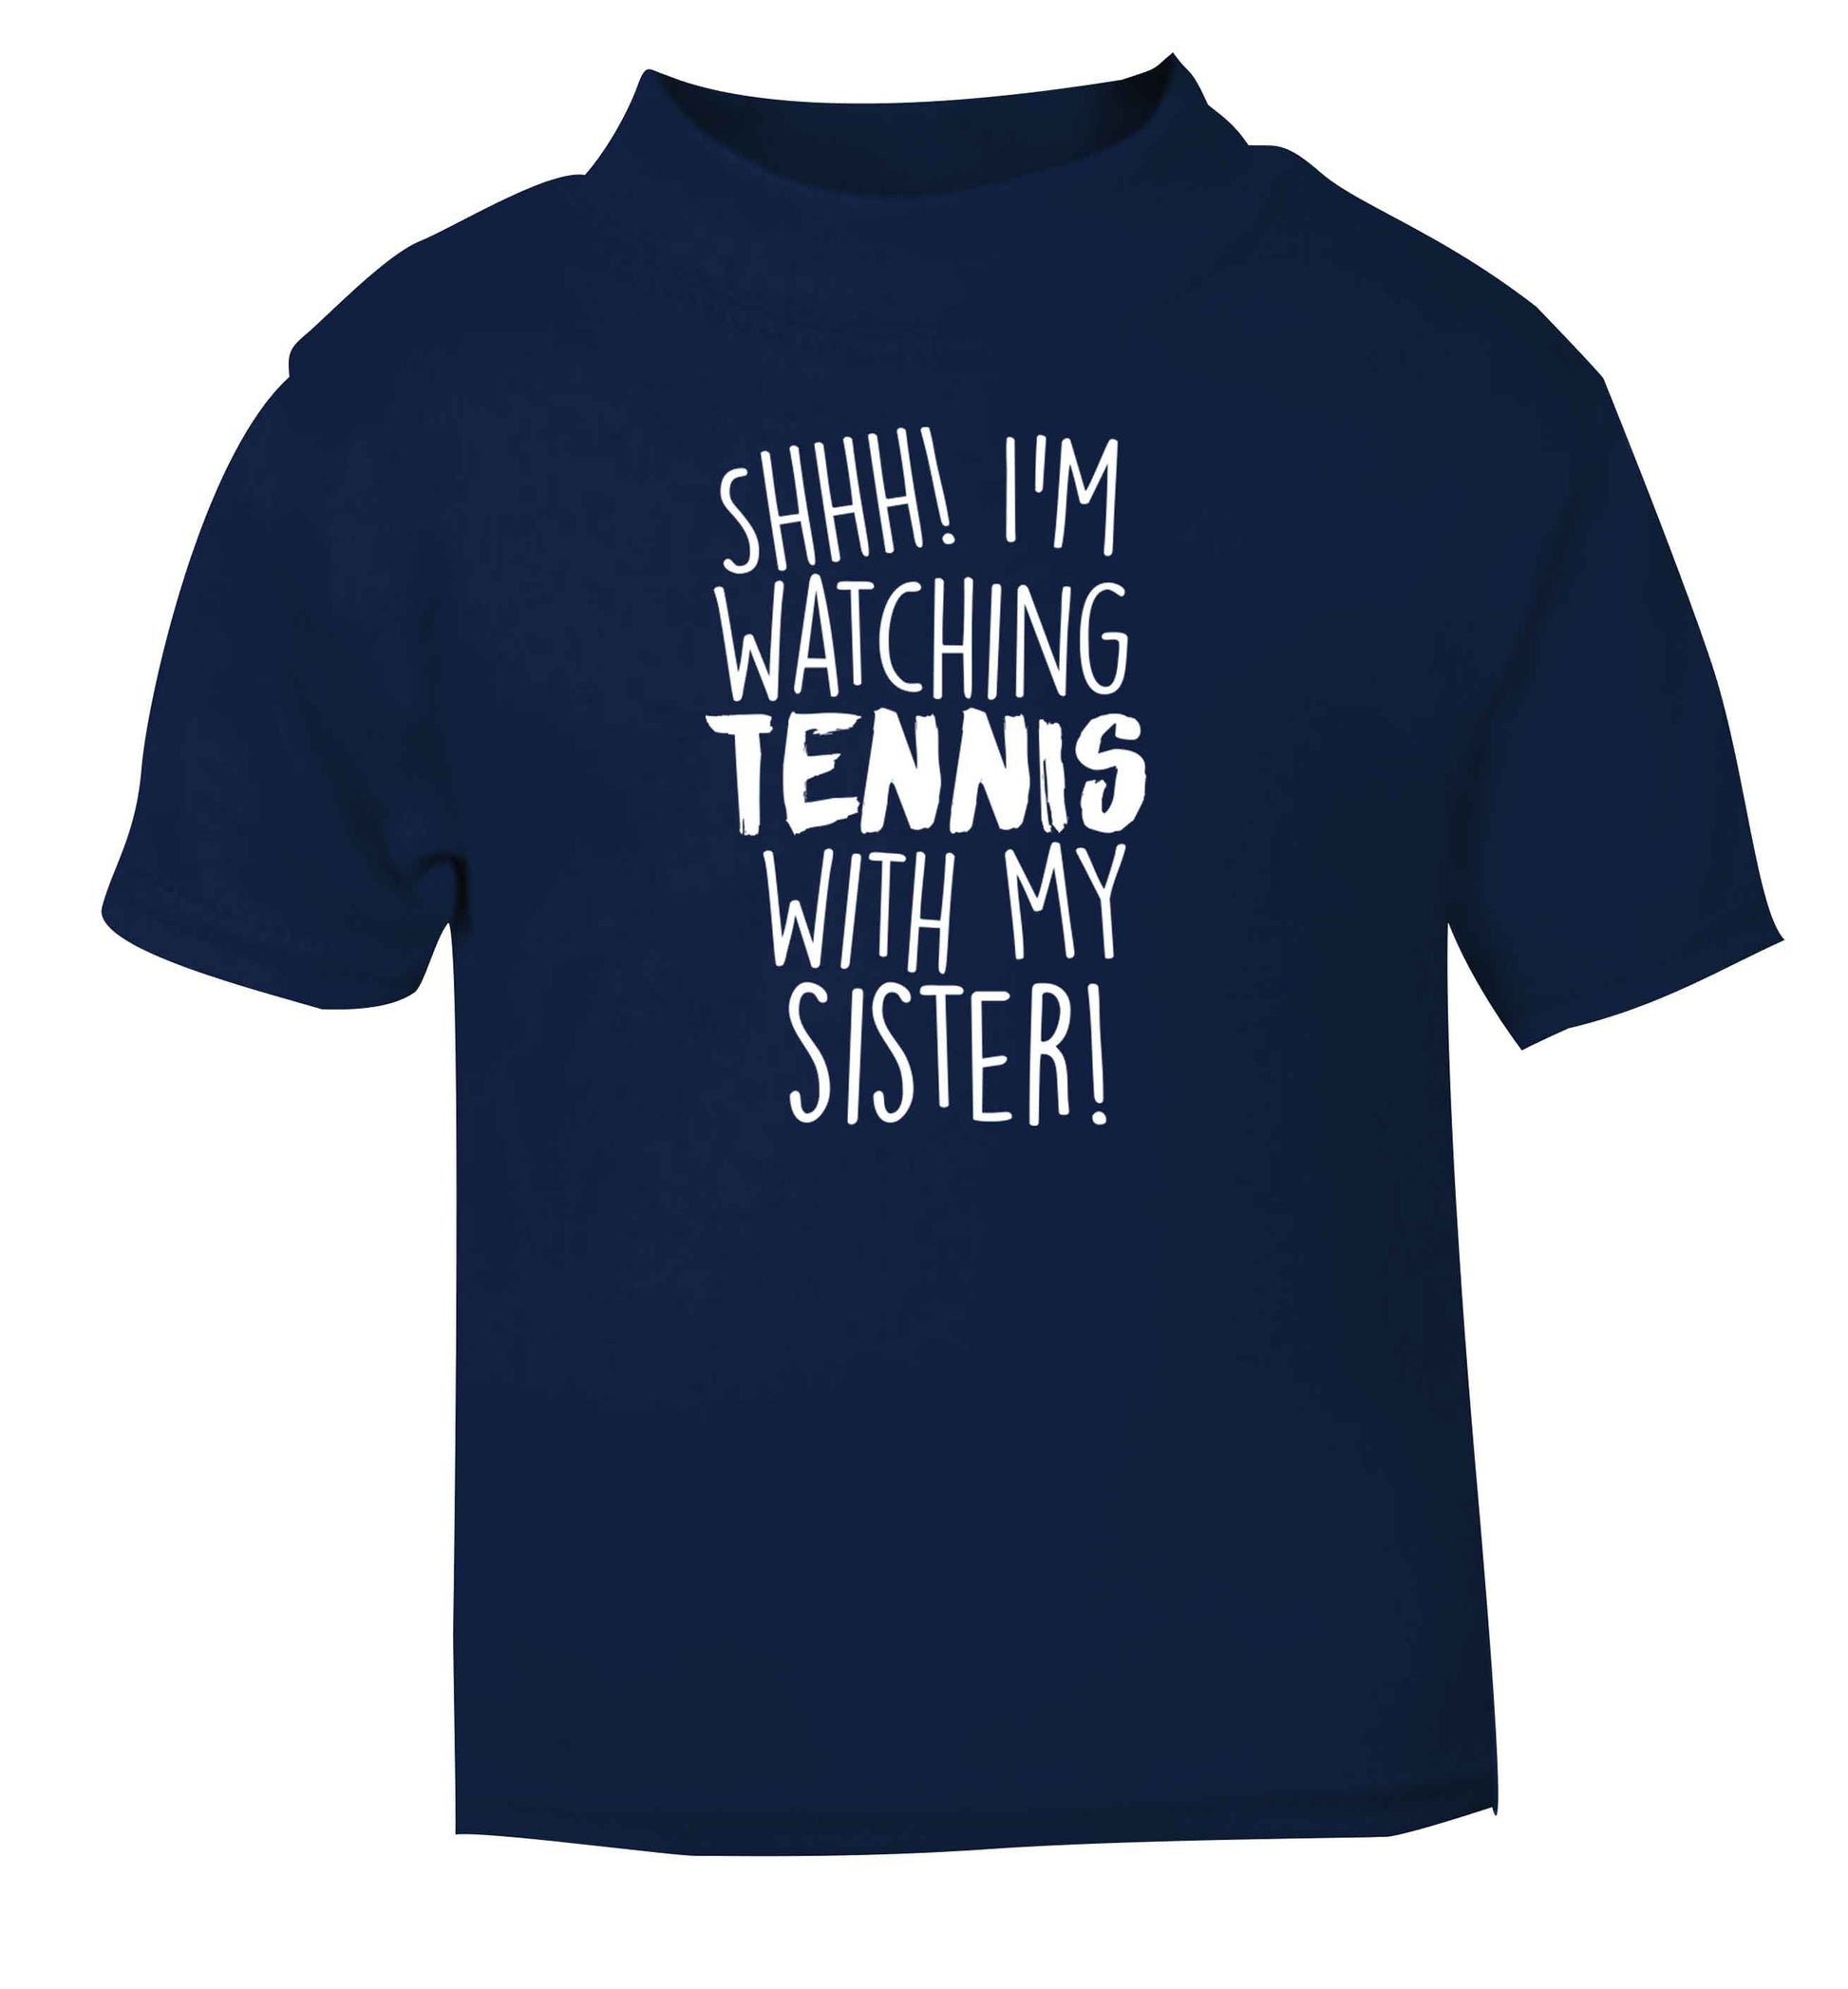 Shh! I'm watching tennis with my sister! navy Baby Toddler Tshirt 2 Years